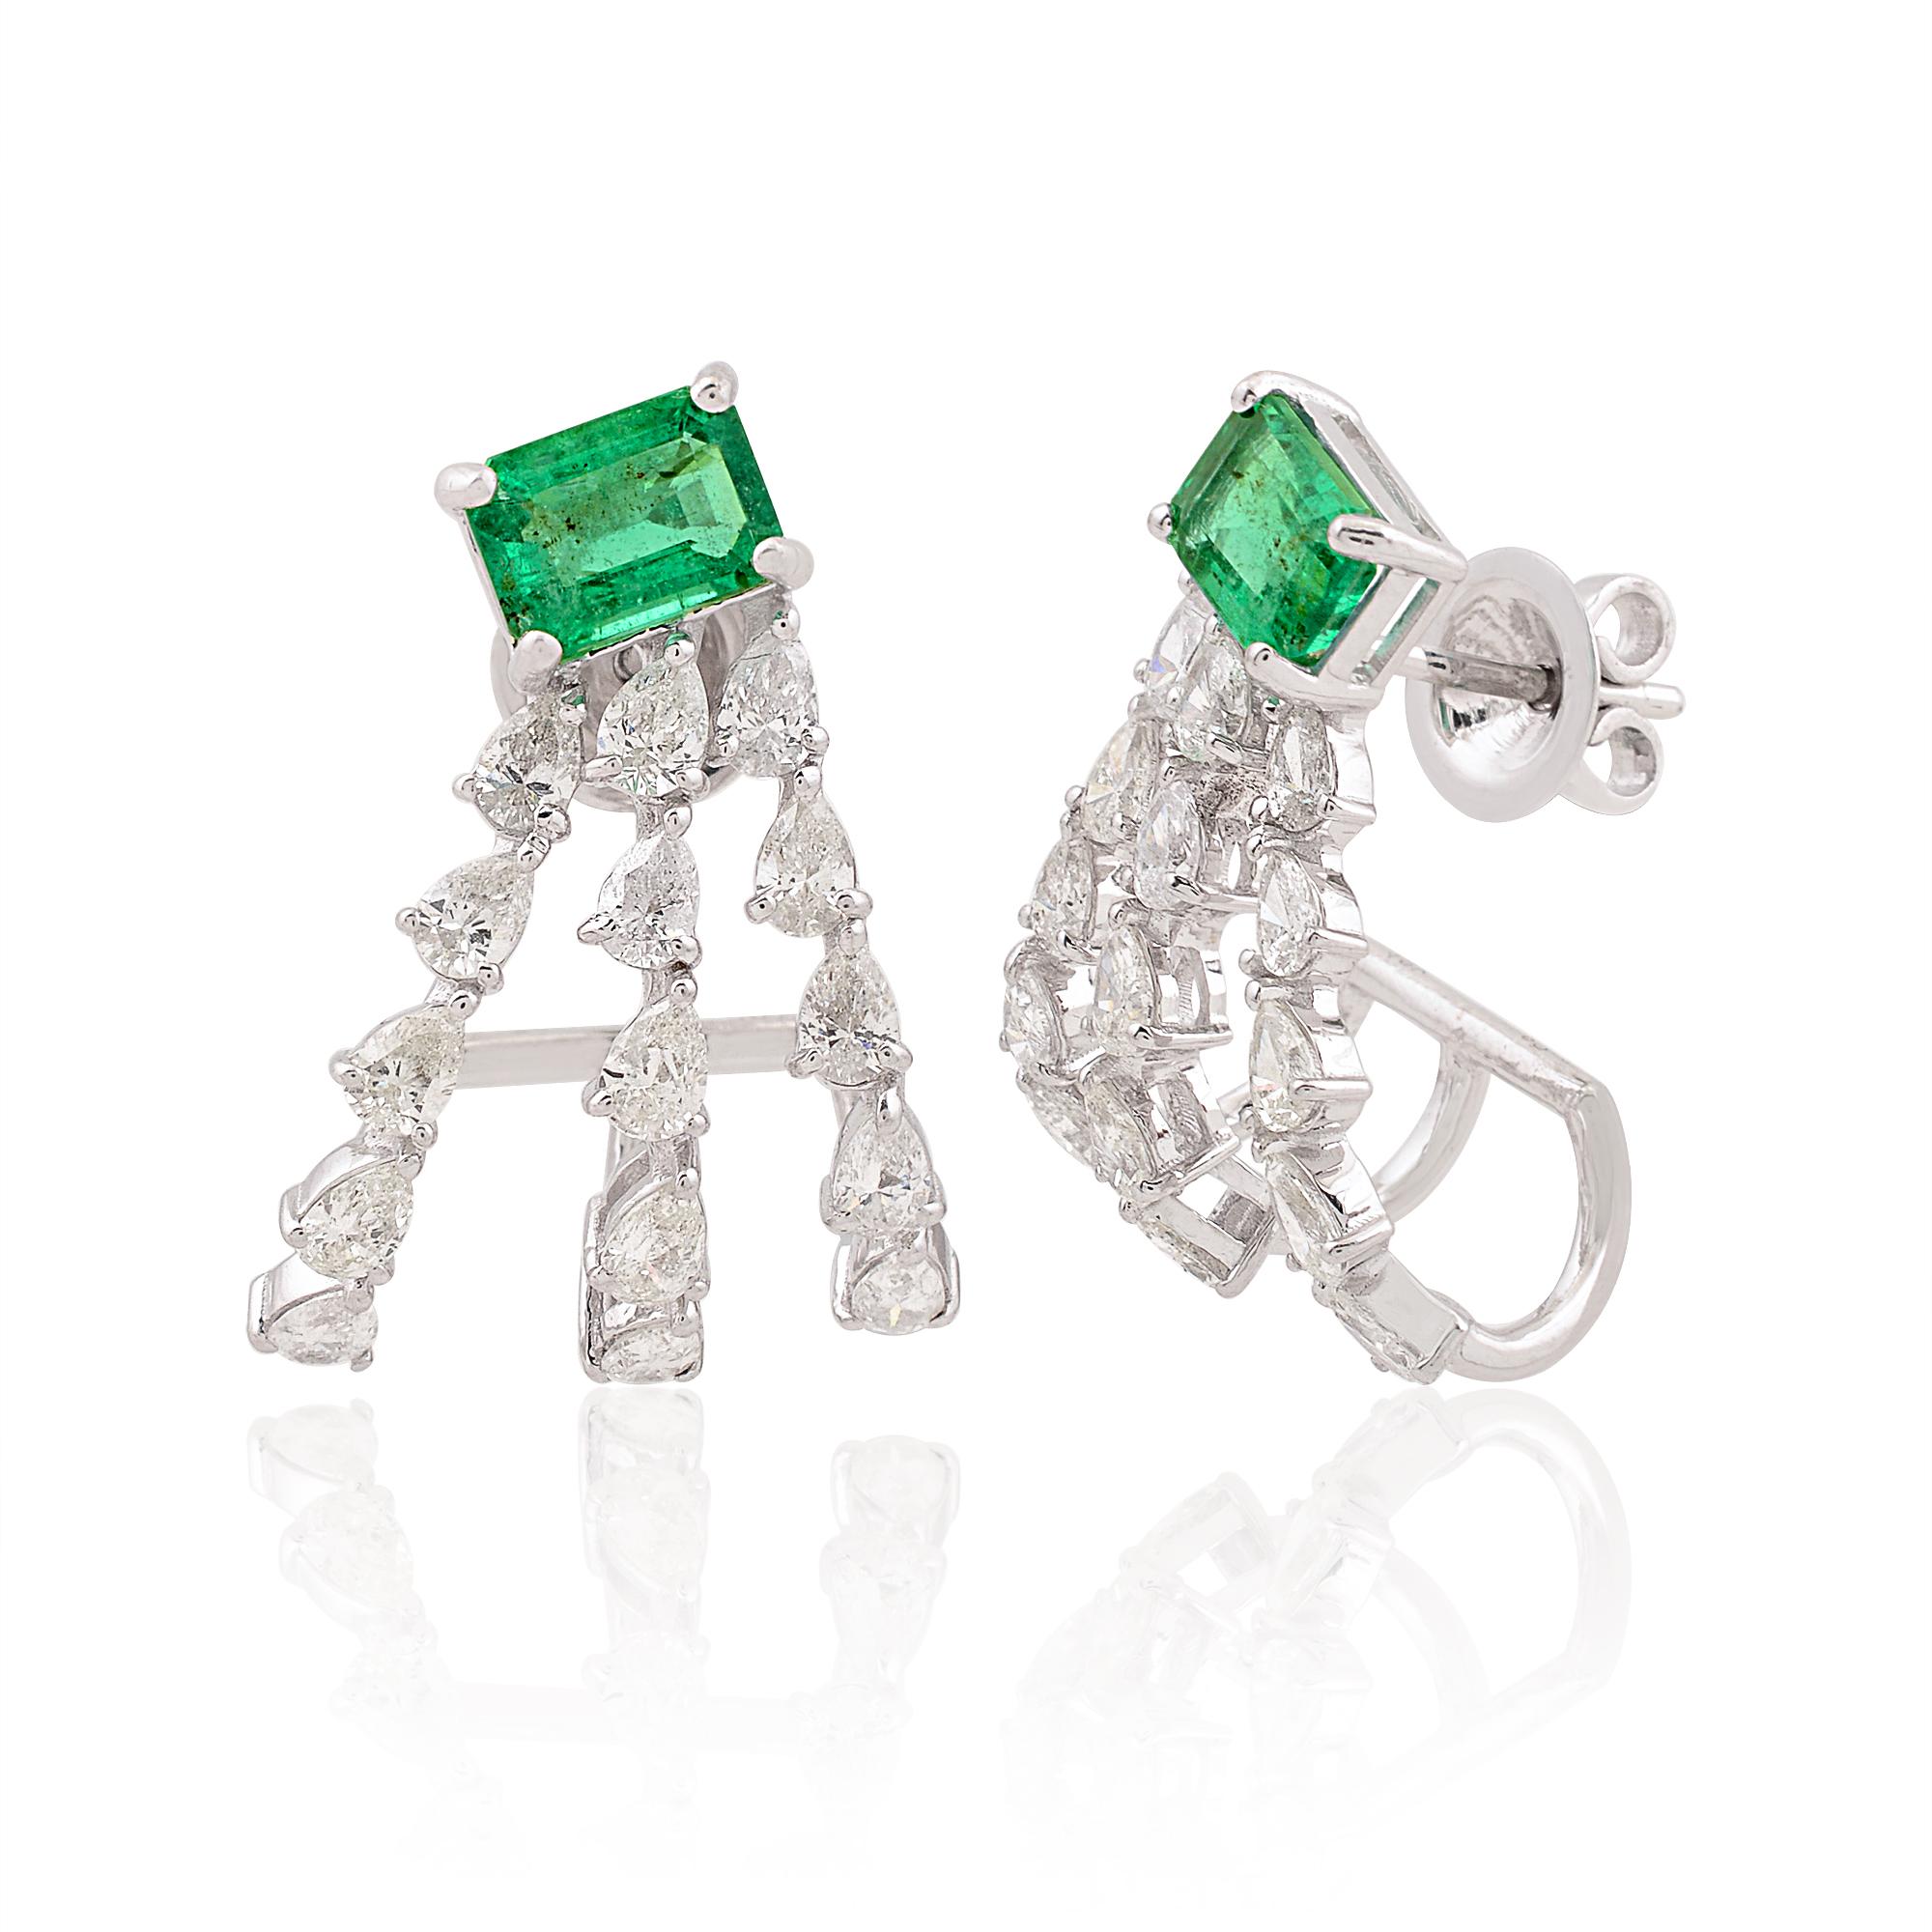 Item Code :- SEE-11381
Gross Wt. :- 8 gm
18k White Gold Wt. :- 7.17 gm
Diamond Wt. :- 2.21 Ct. ( AVERAGE DIAMOND CLARITY SI1-SI2 & COLOR H-I )
Emerald Wt. :- 1.92 Ct.
Earrings Size :- 23 mm approx.
✦ Sizing
.....................
We can adjust most